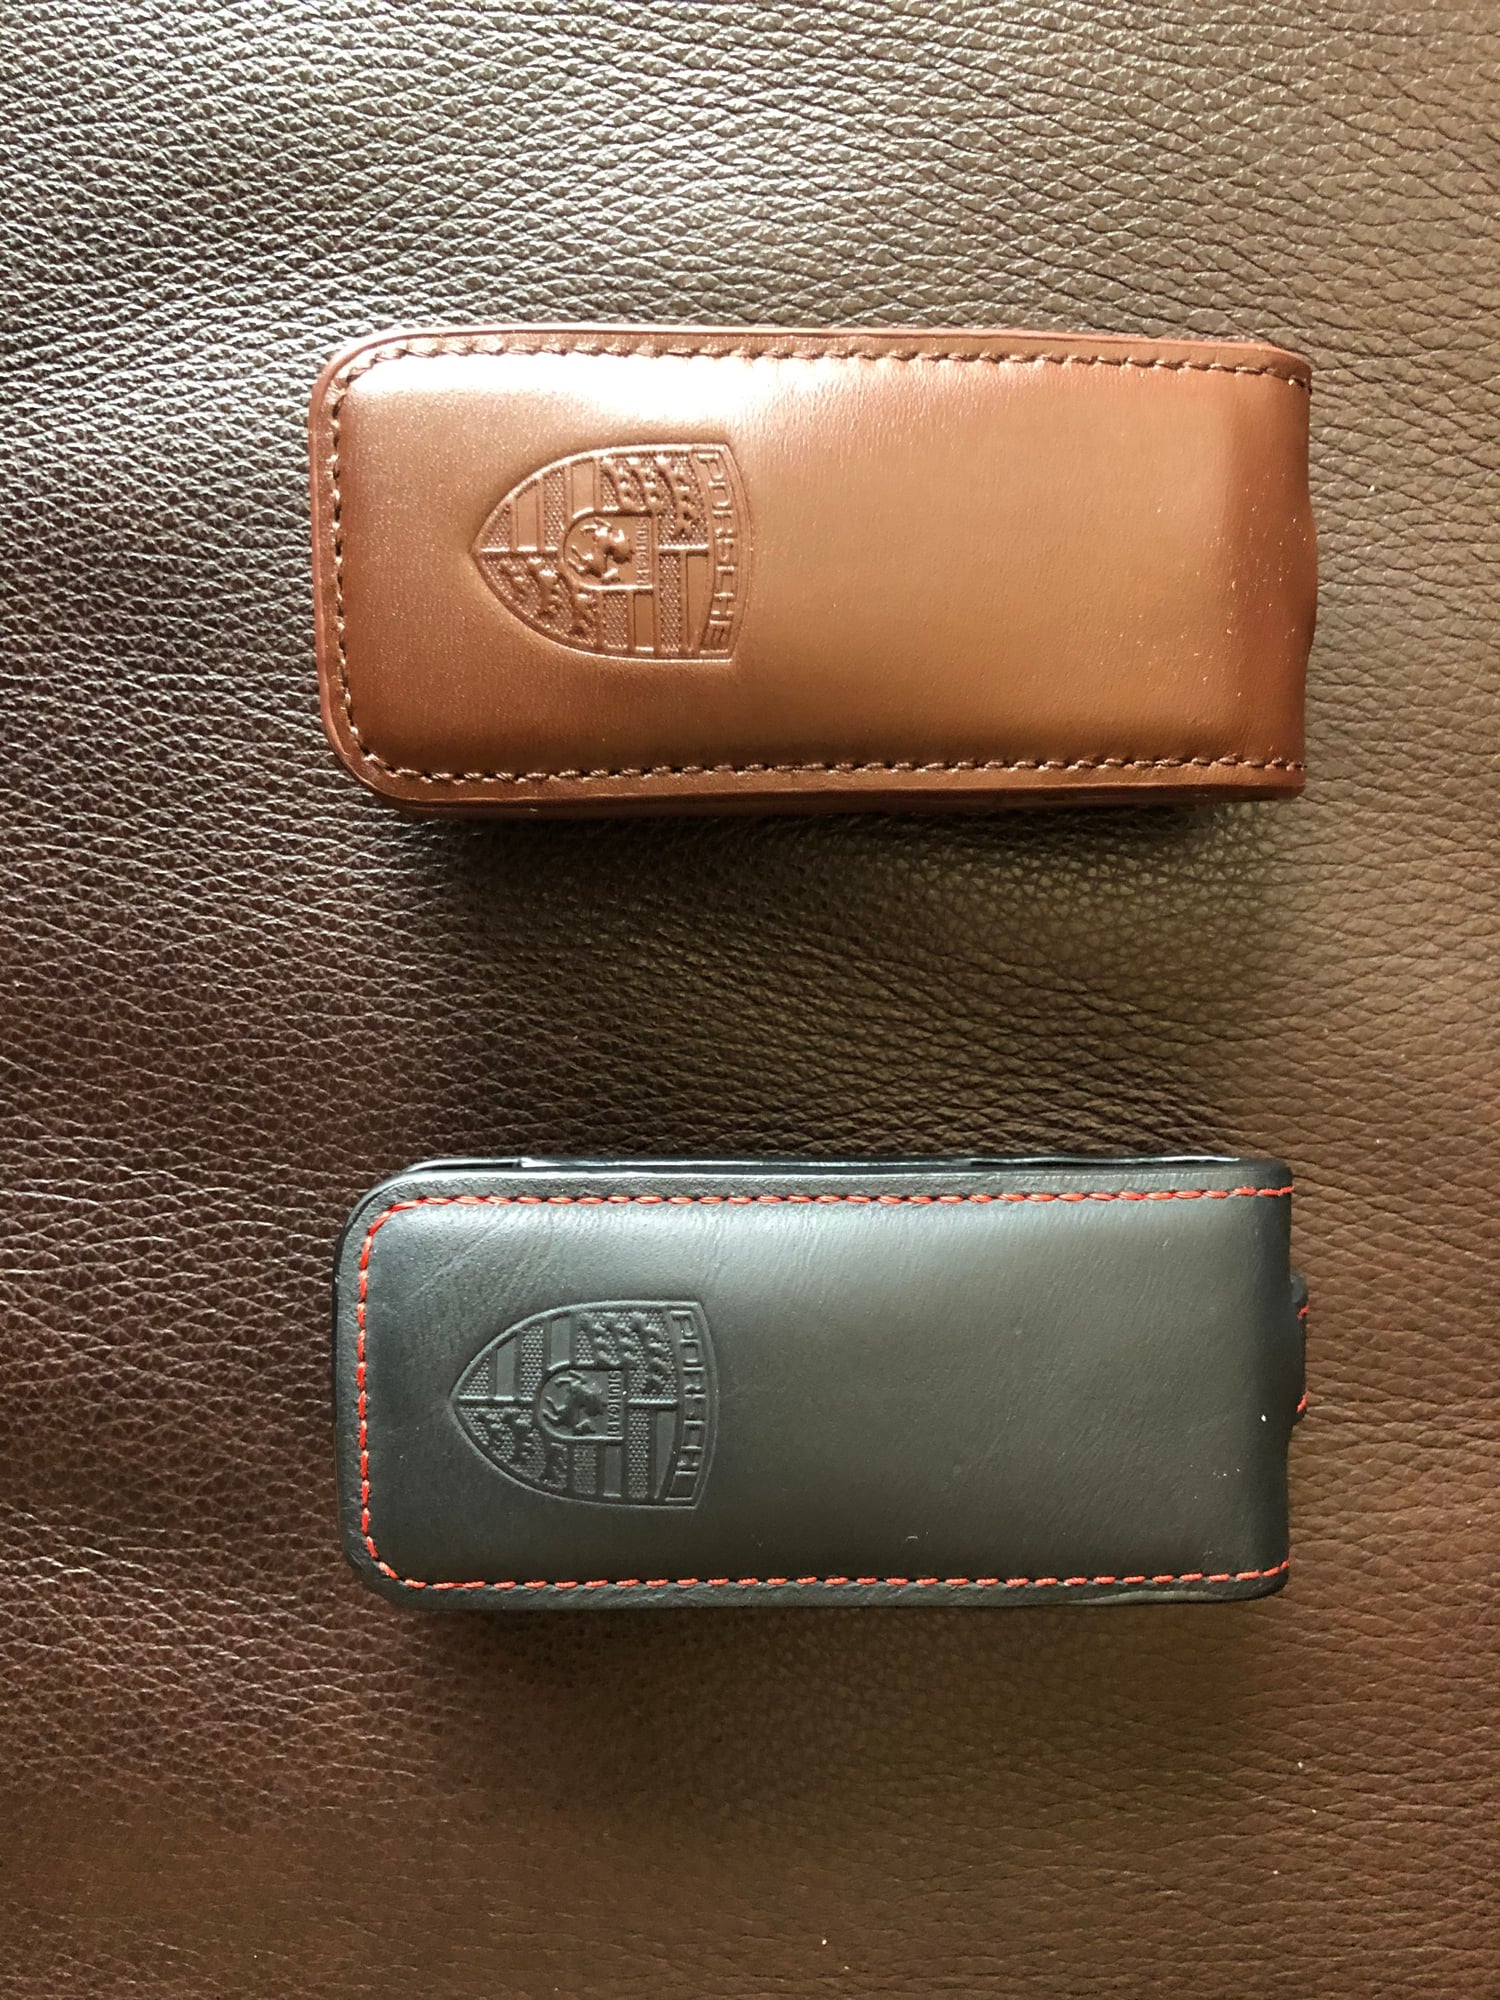 Accessories - Porsche keychains and key fob leather cases - Used - 1964 to 2020 Porsche All Models - Campbell, CA 95008, United States